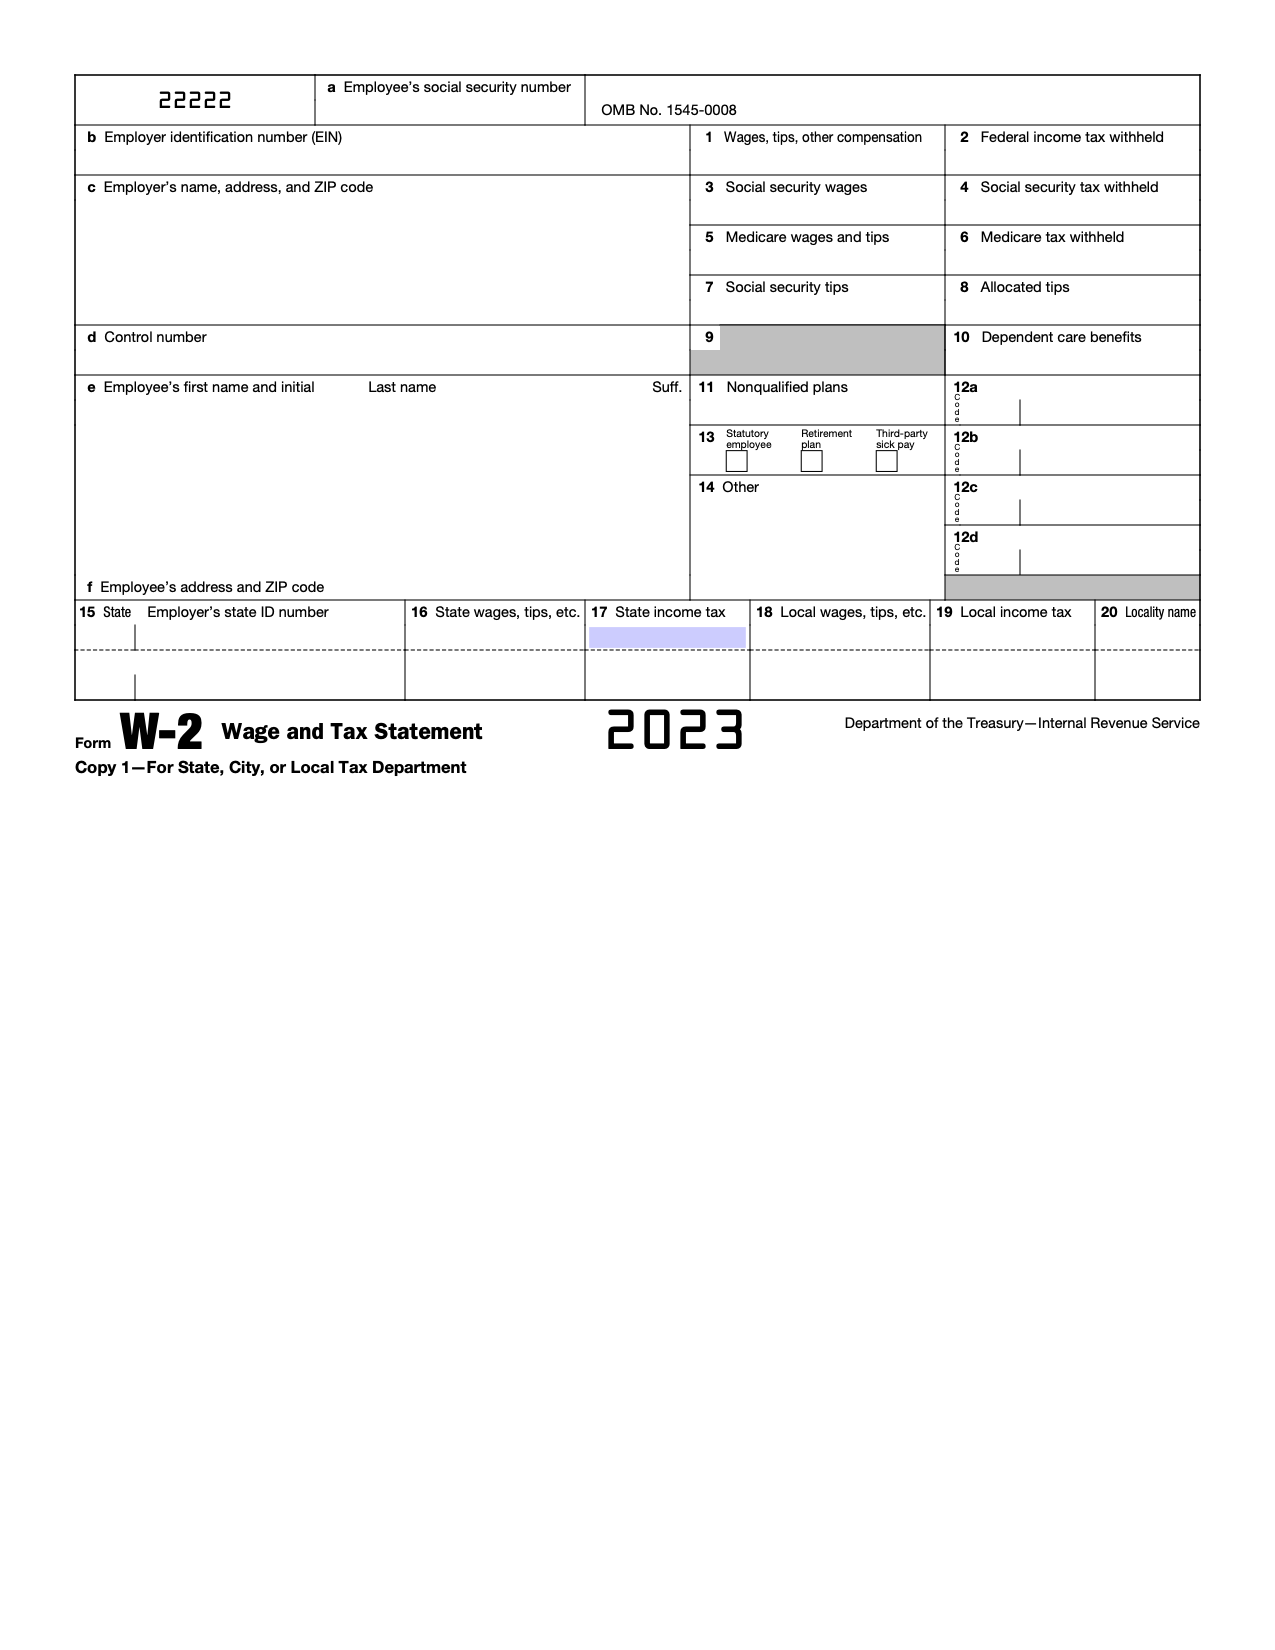 Free Irs Form W-2 | Wage And Tax Statement - Pdf – Eforms intended for Can I Print My Own W2 Forms